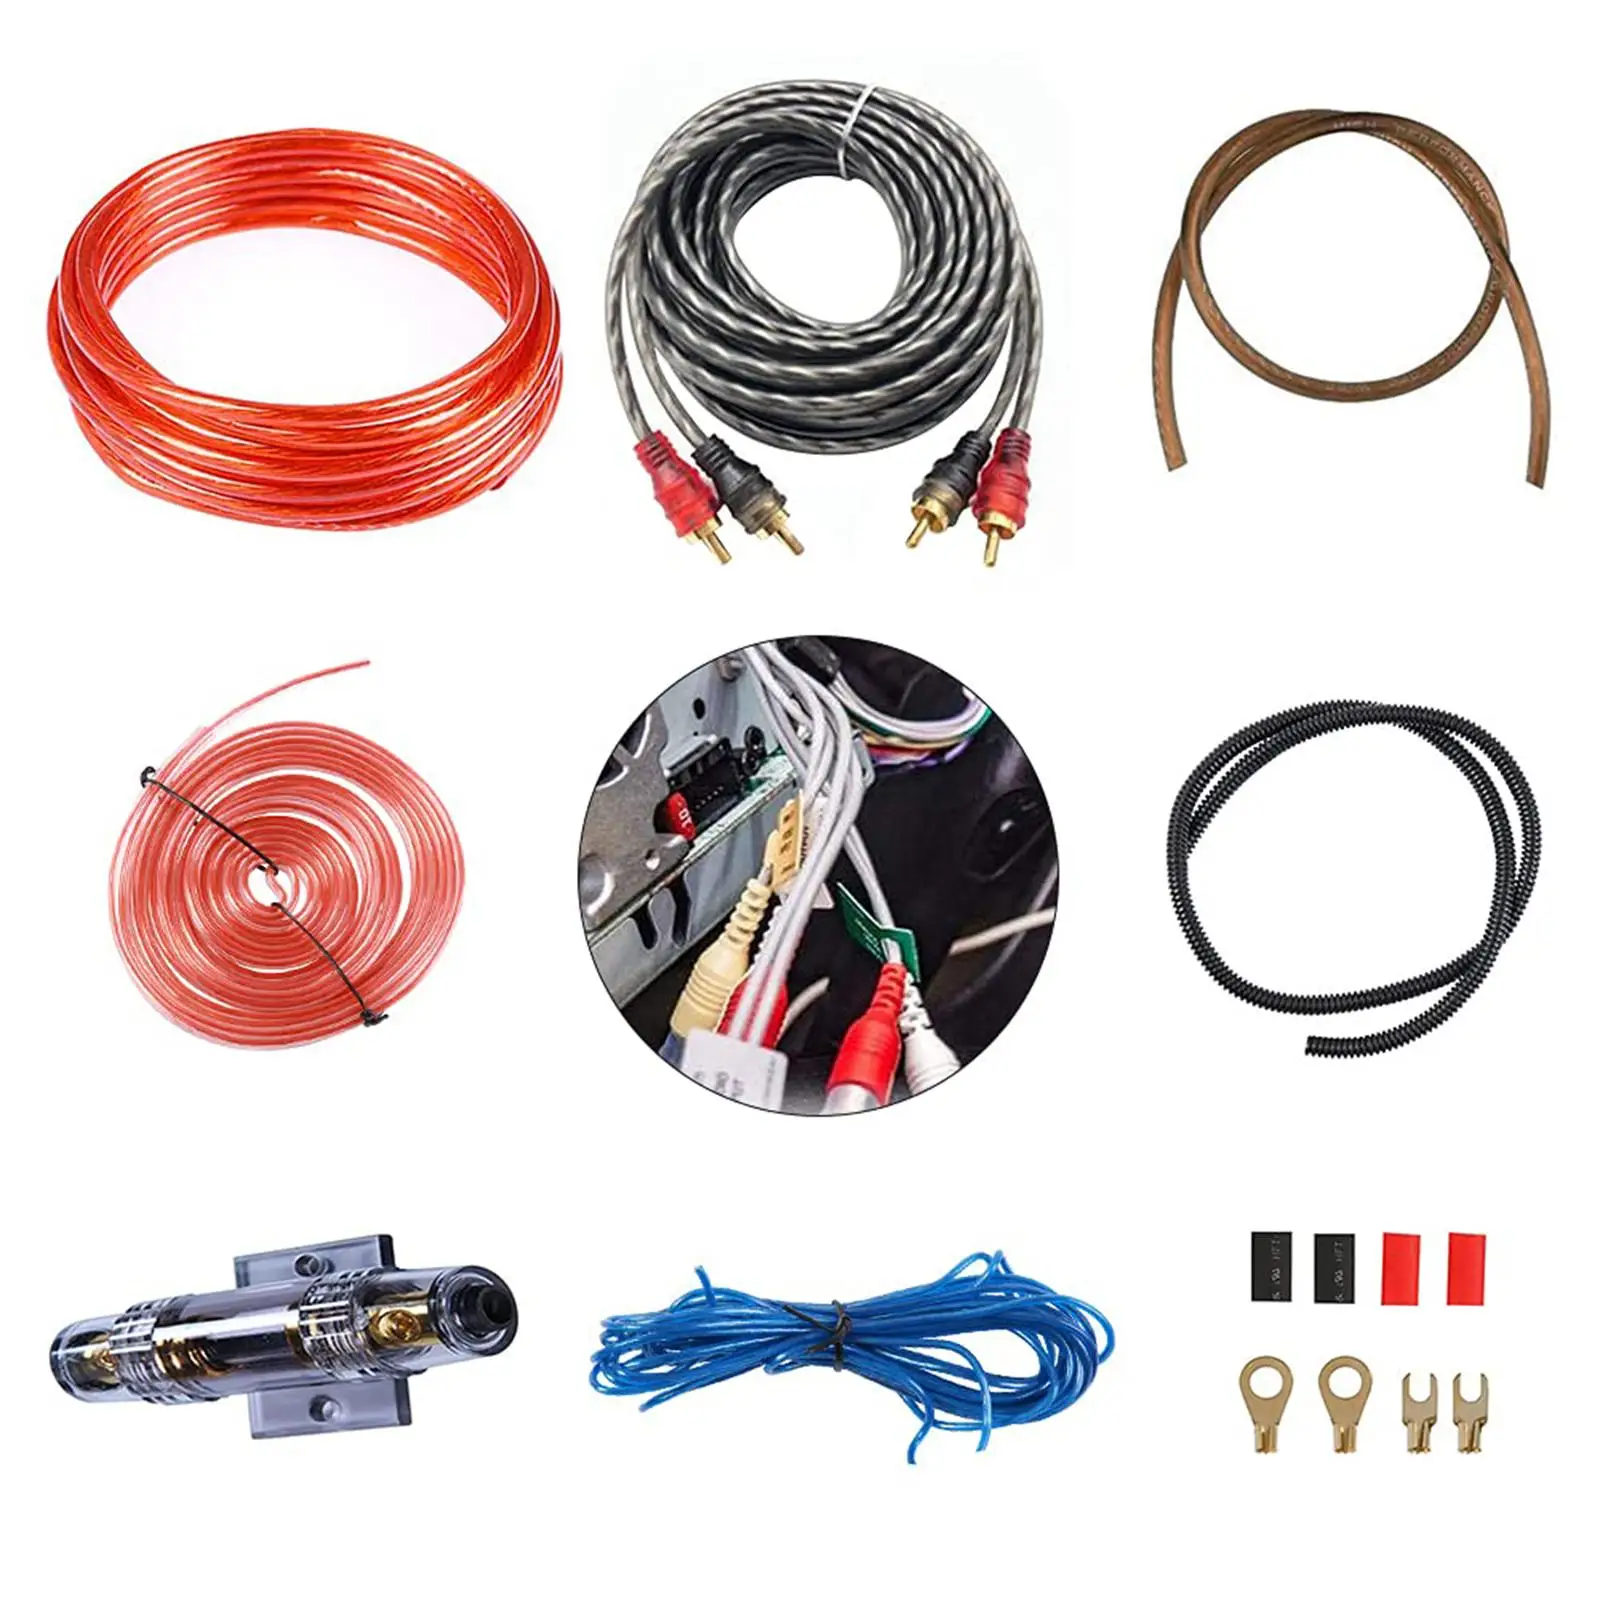 Car Audio Wire Wiring Amplifier Subwoofer Installation Car Power Cord